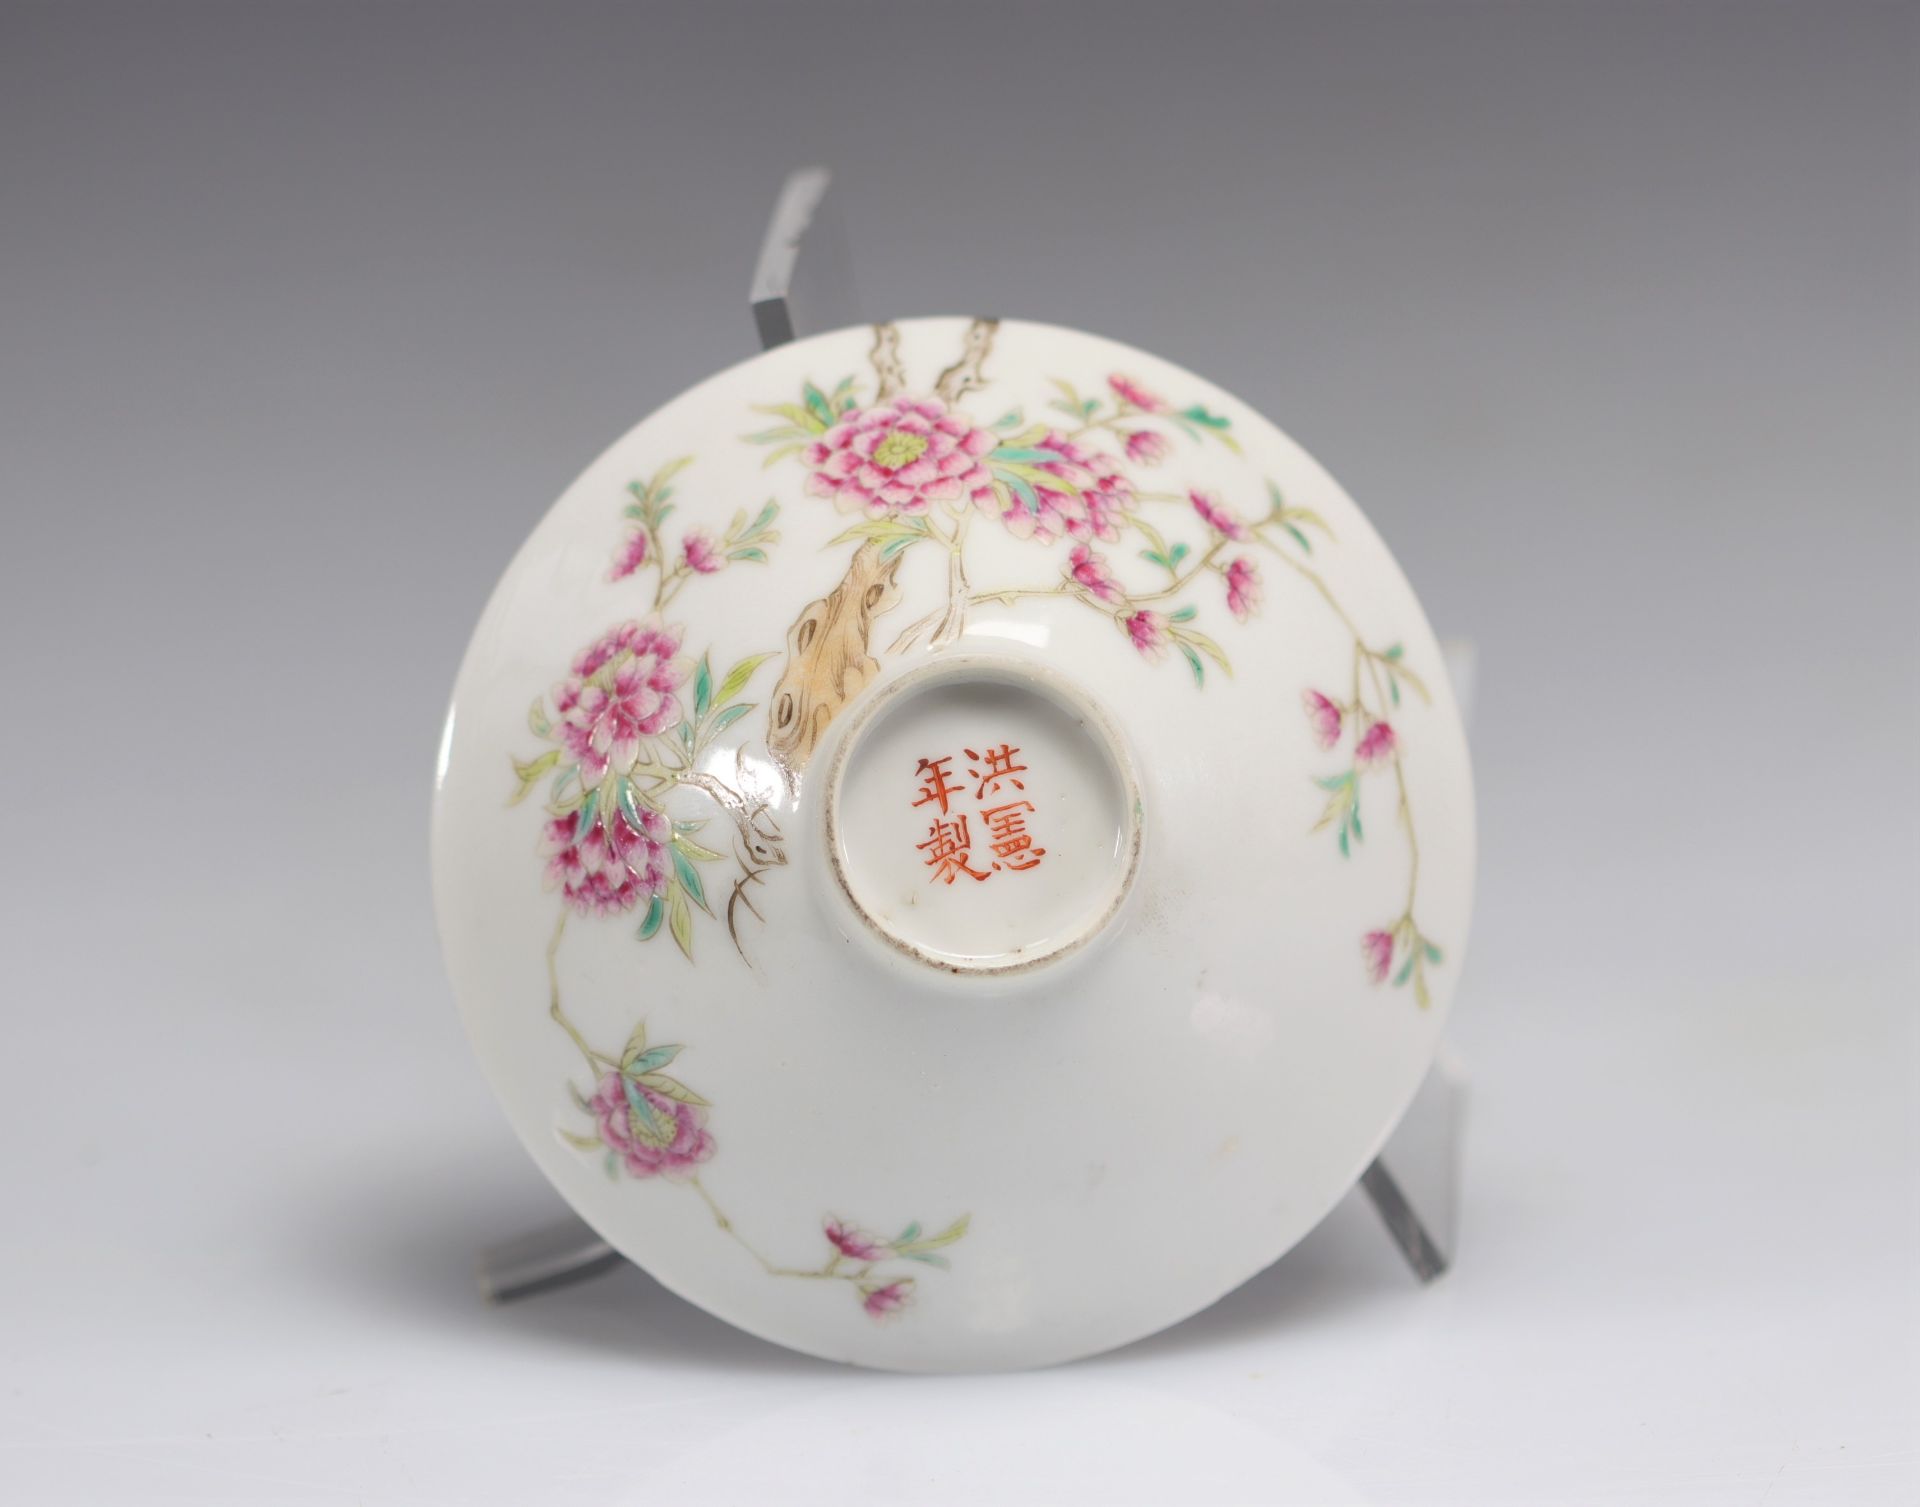 (2) A famille rose porcelain bowl decorated with pink flowers from China, Hongxian period (1915-1916 - Image 5 of 5